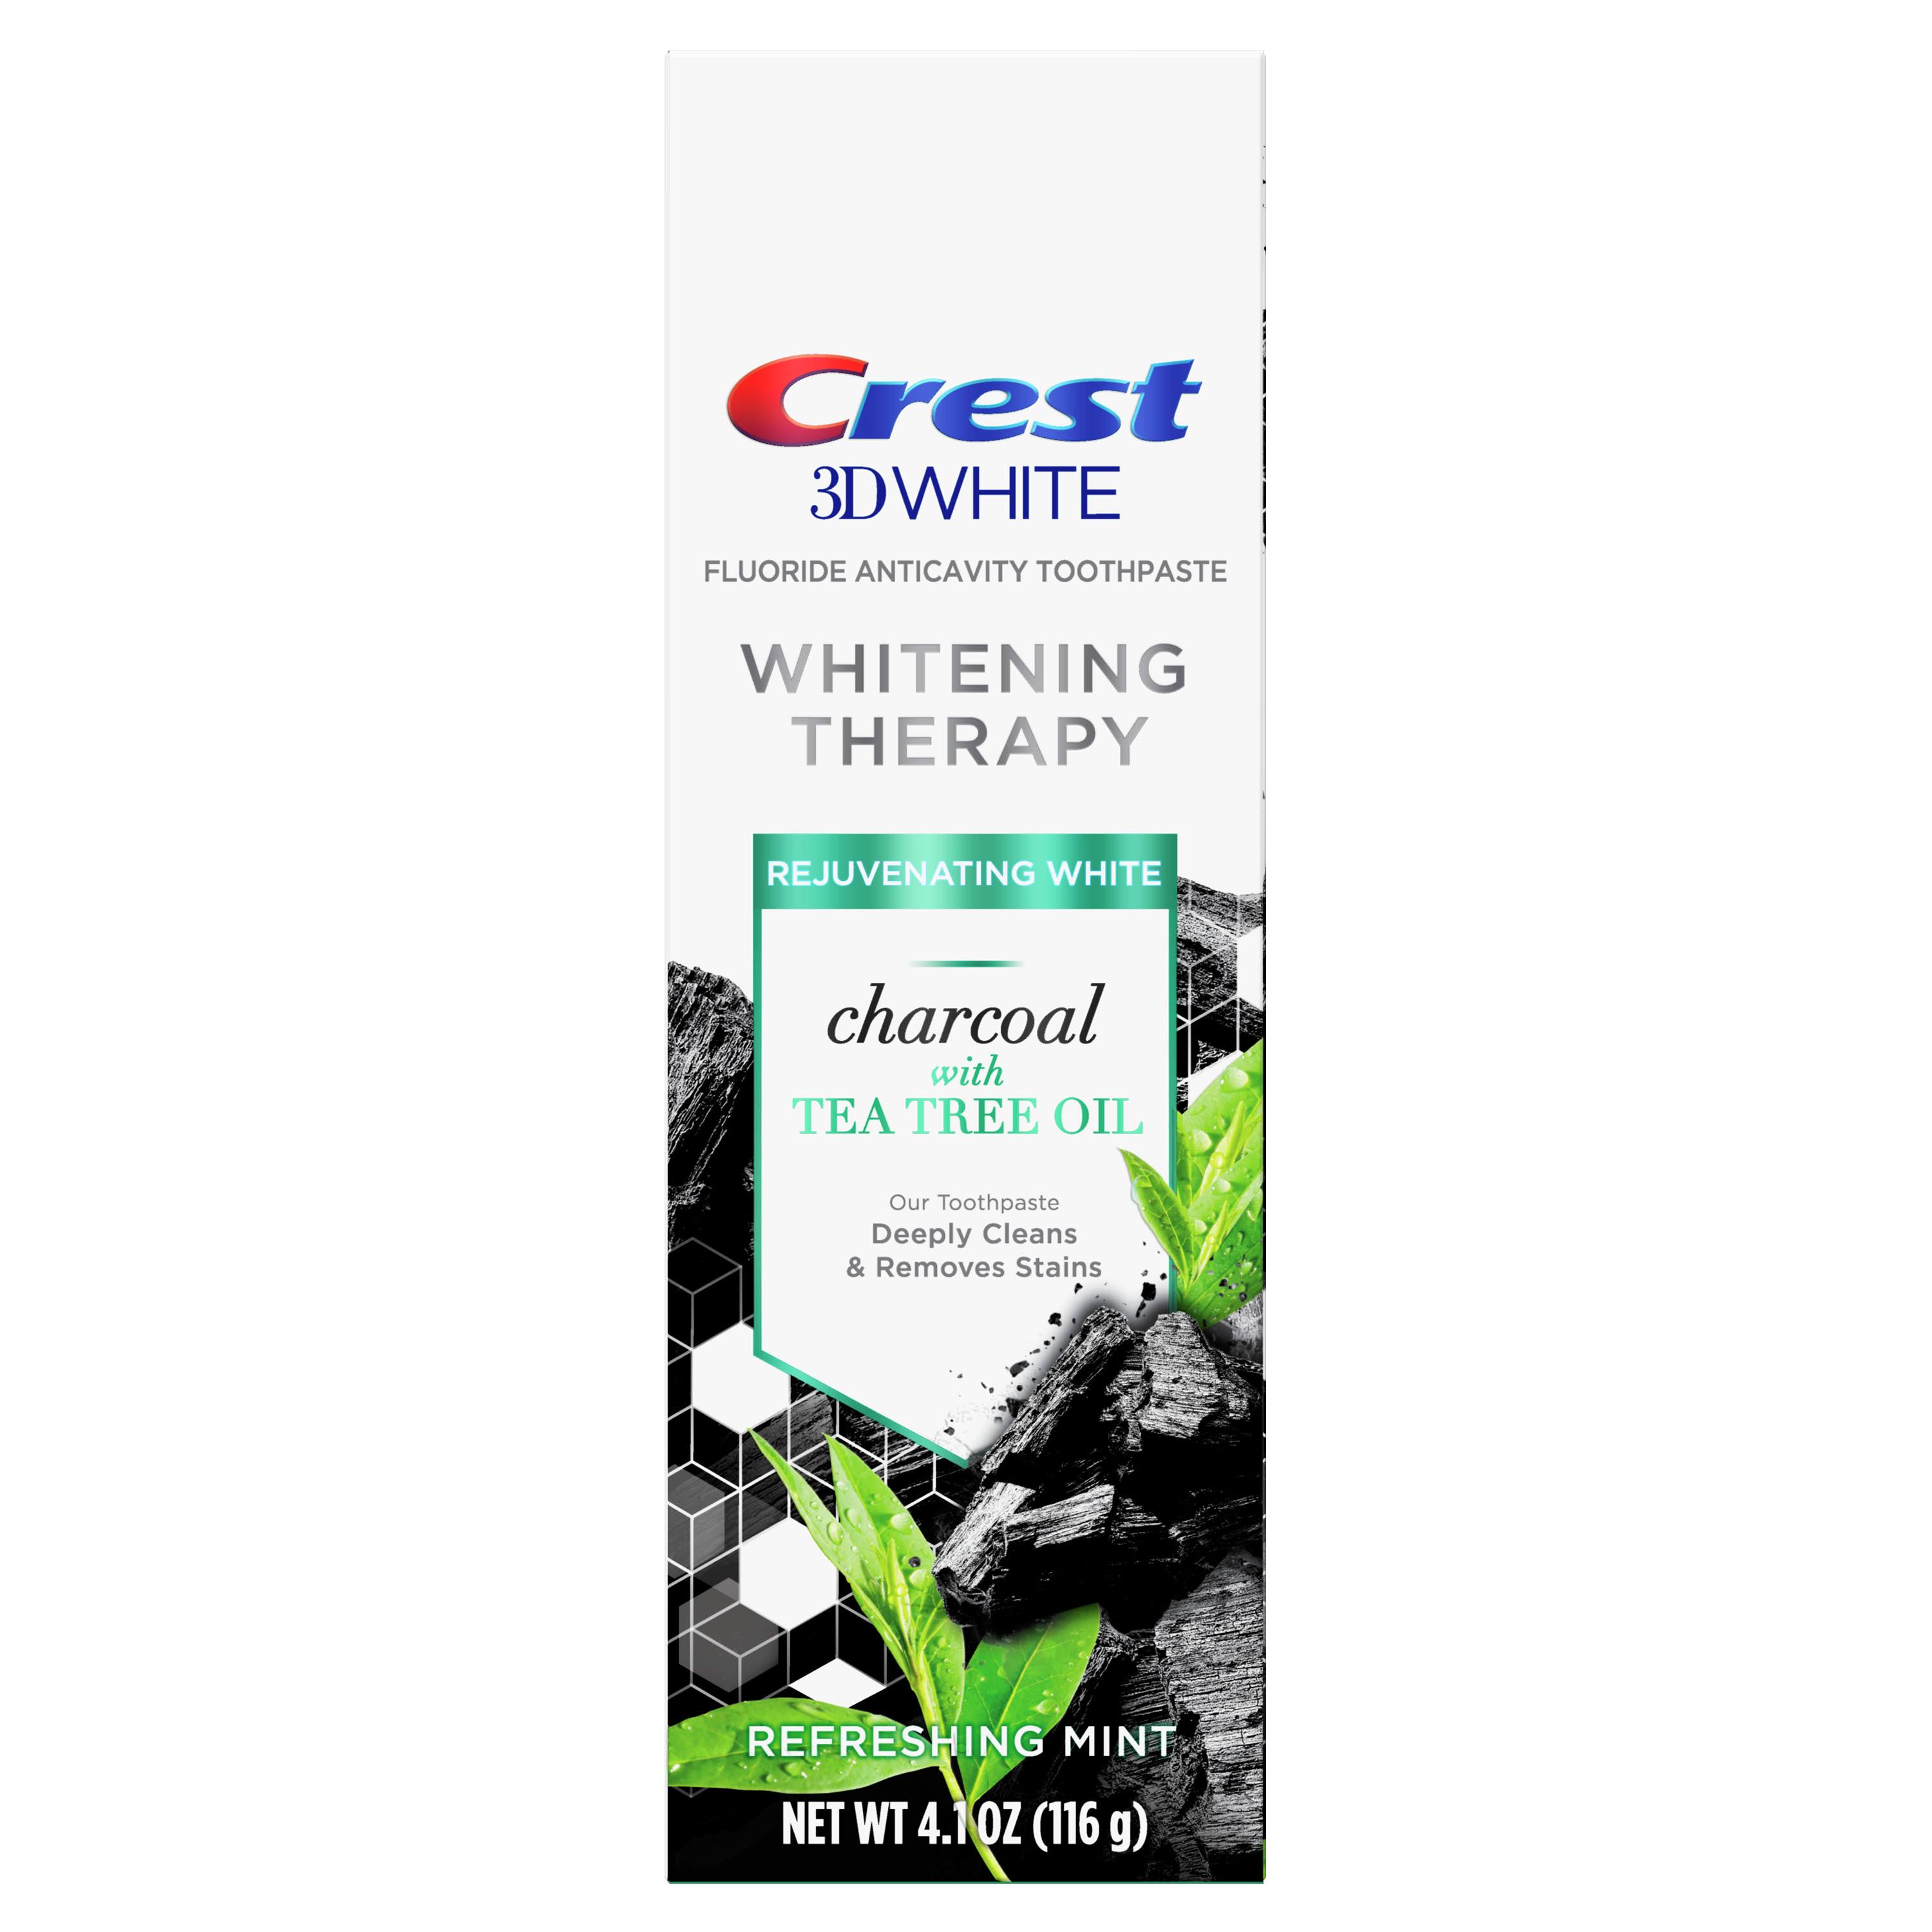 Crest 3d whitening therapy charcoal toothpaste, tea tree oil, 4.1 oz